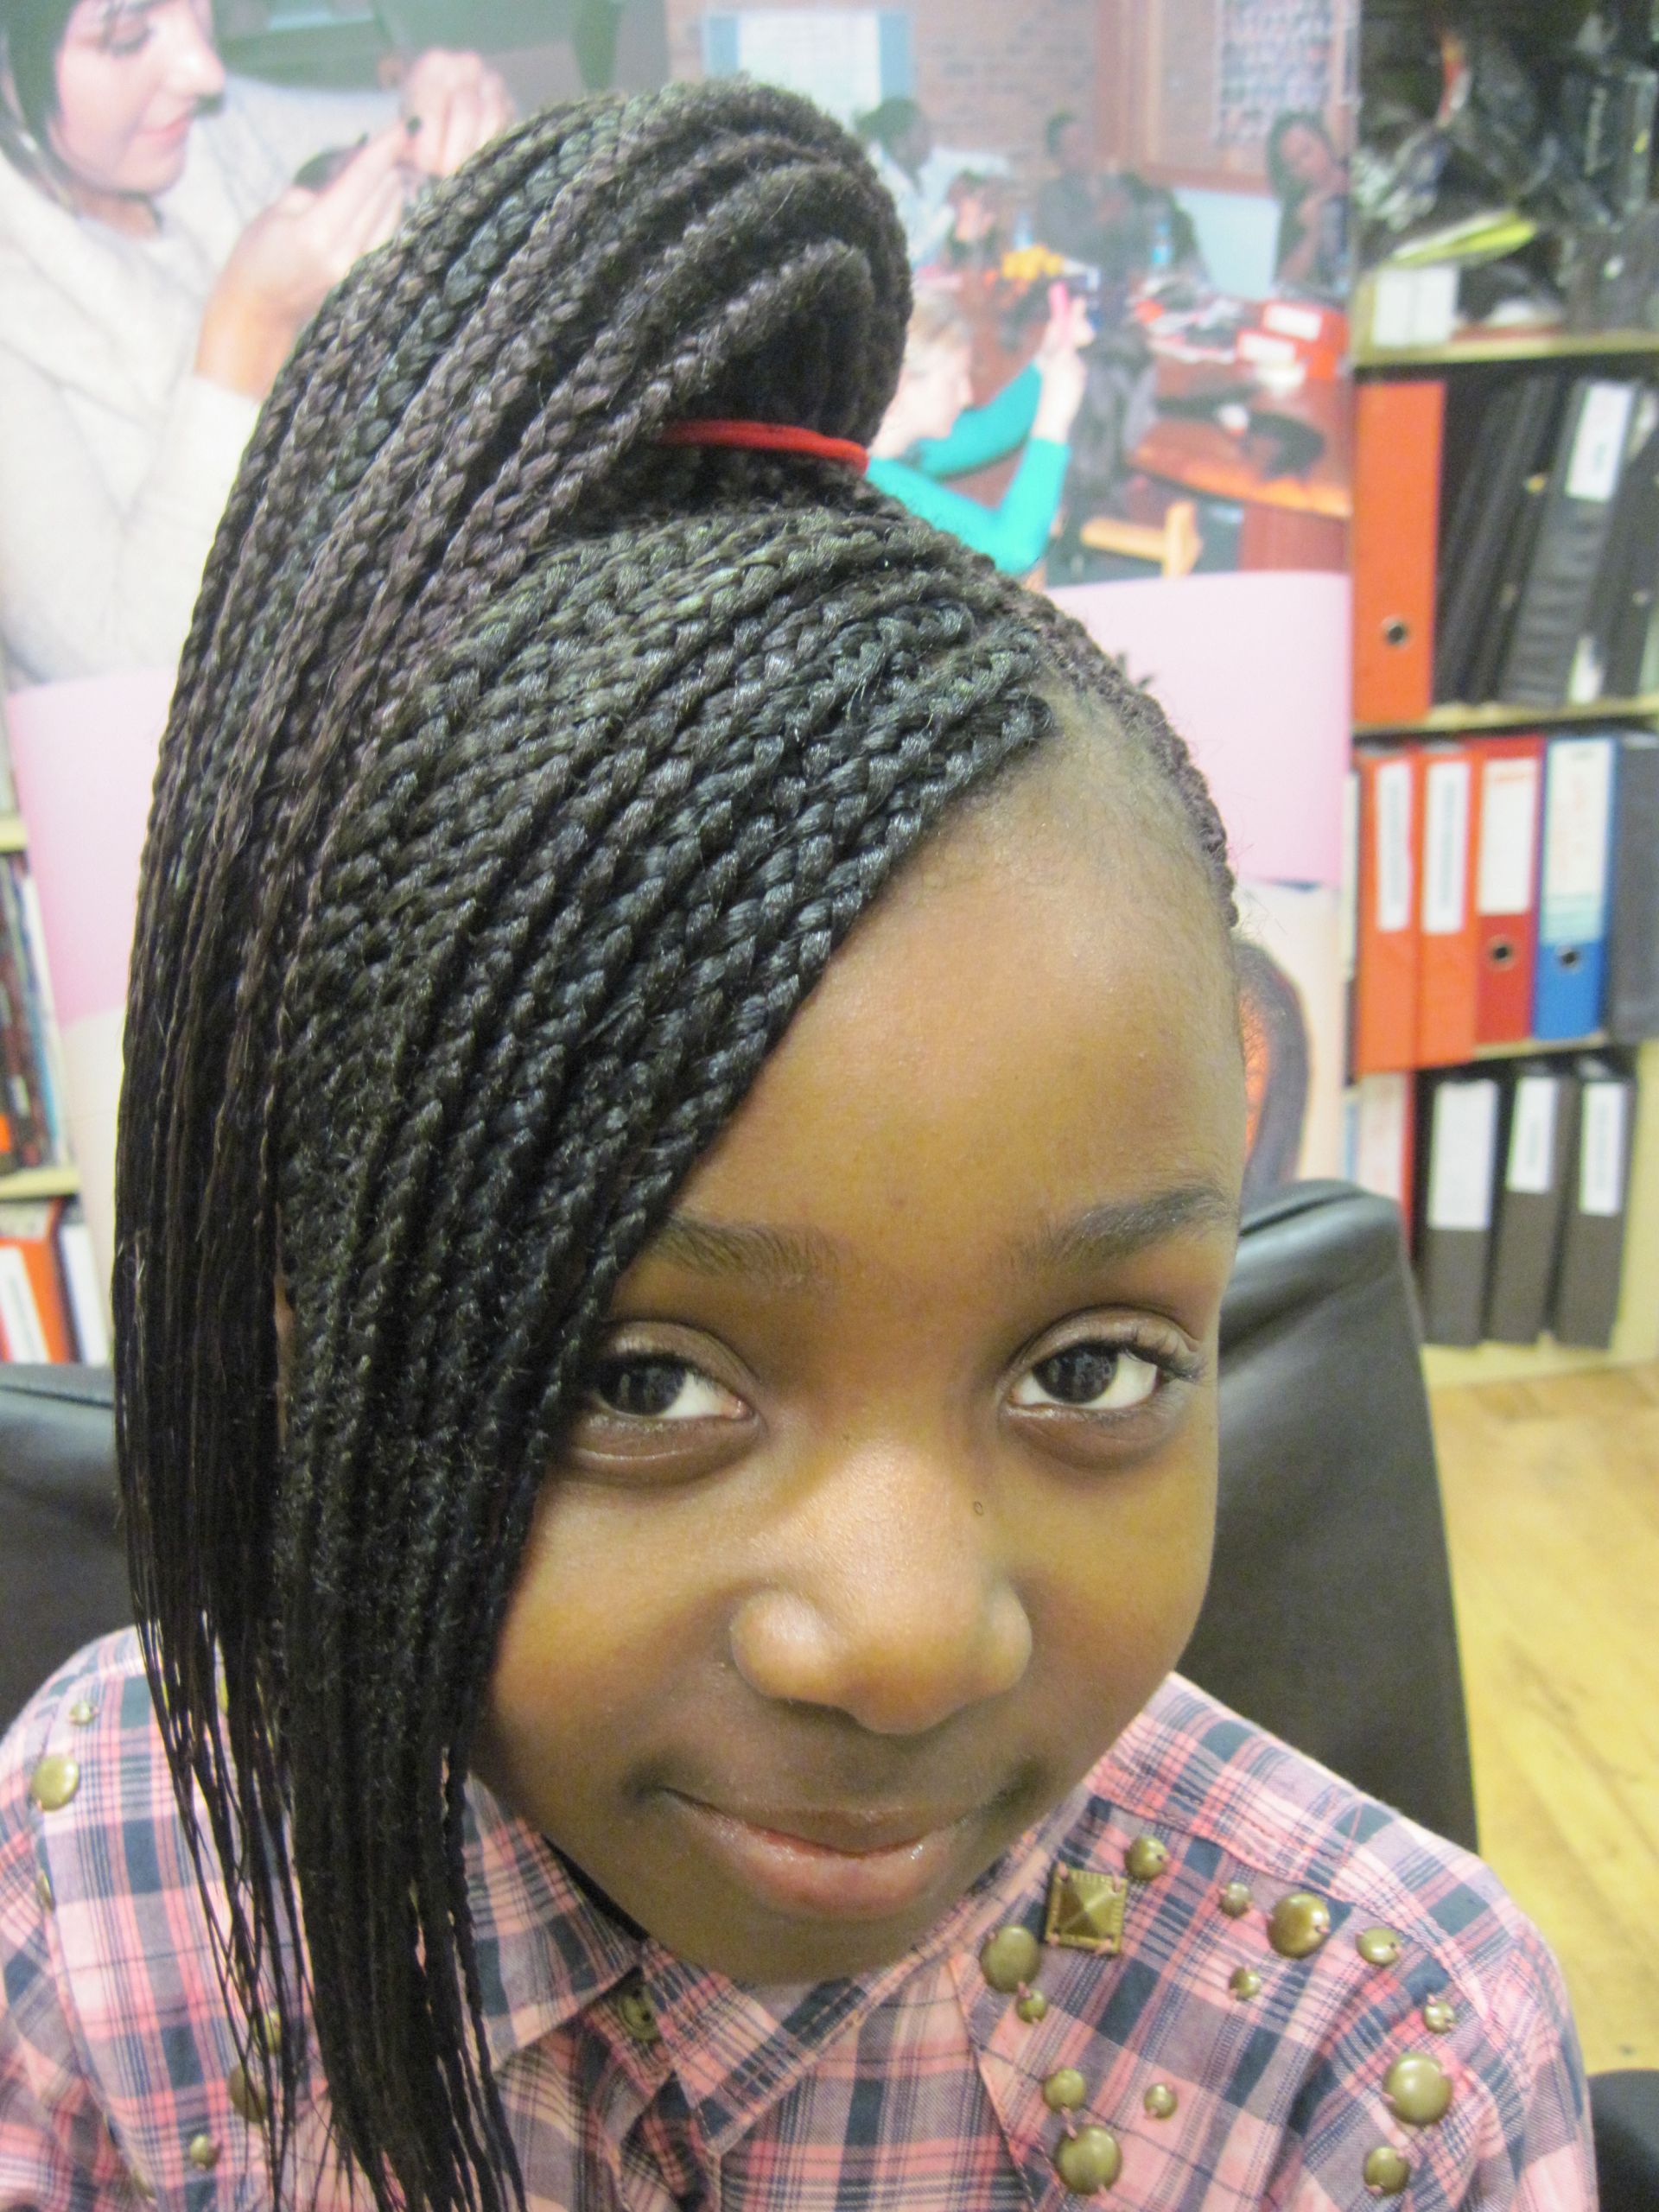 Girls Braided Hairstyles
 INTRODUCTION TO HAIR BRAIDING COURSE